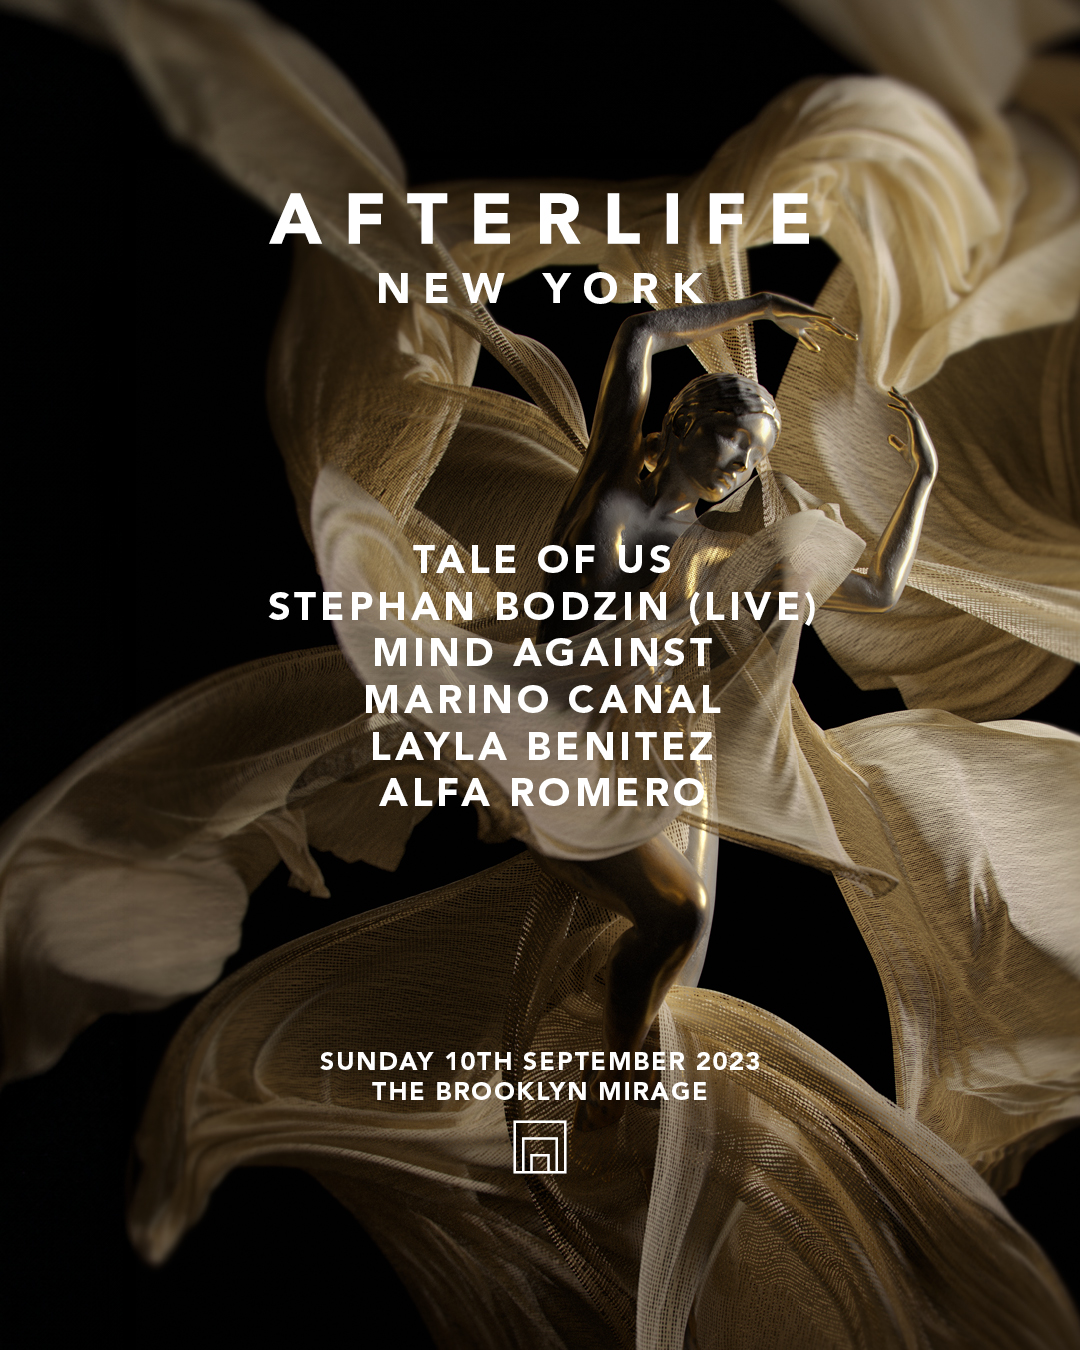 Afterlife Tel Aviv - Festival Lineup, Dates and Location